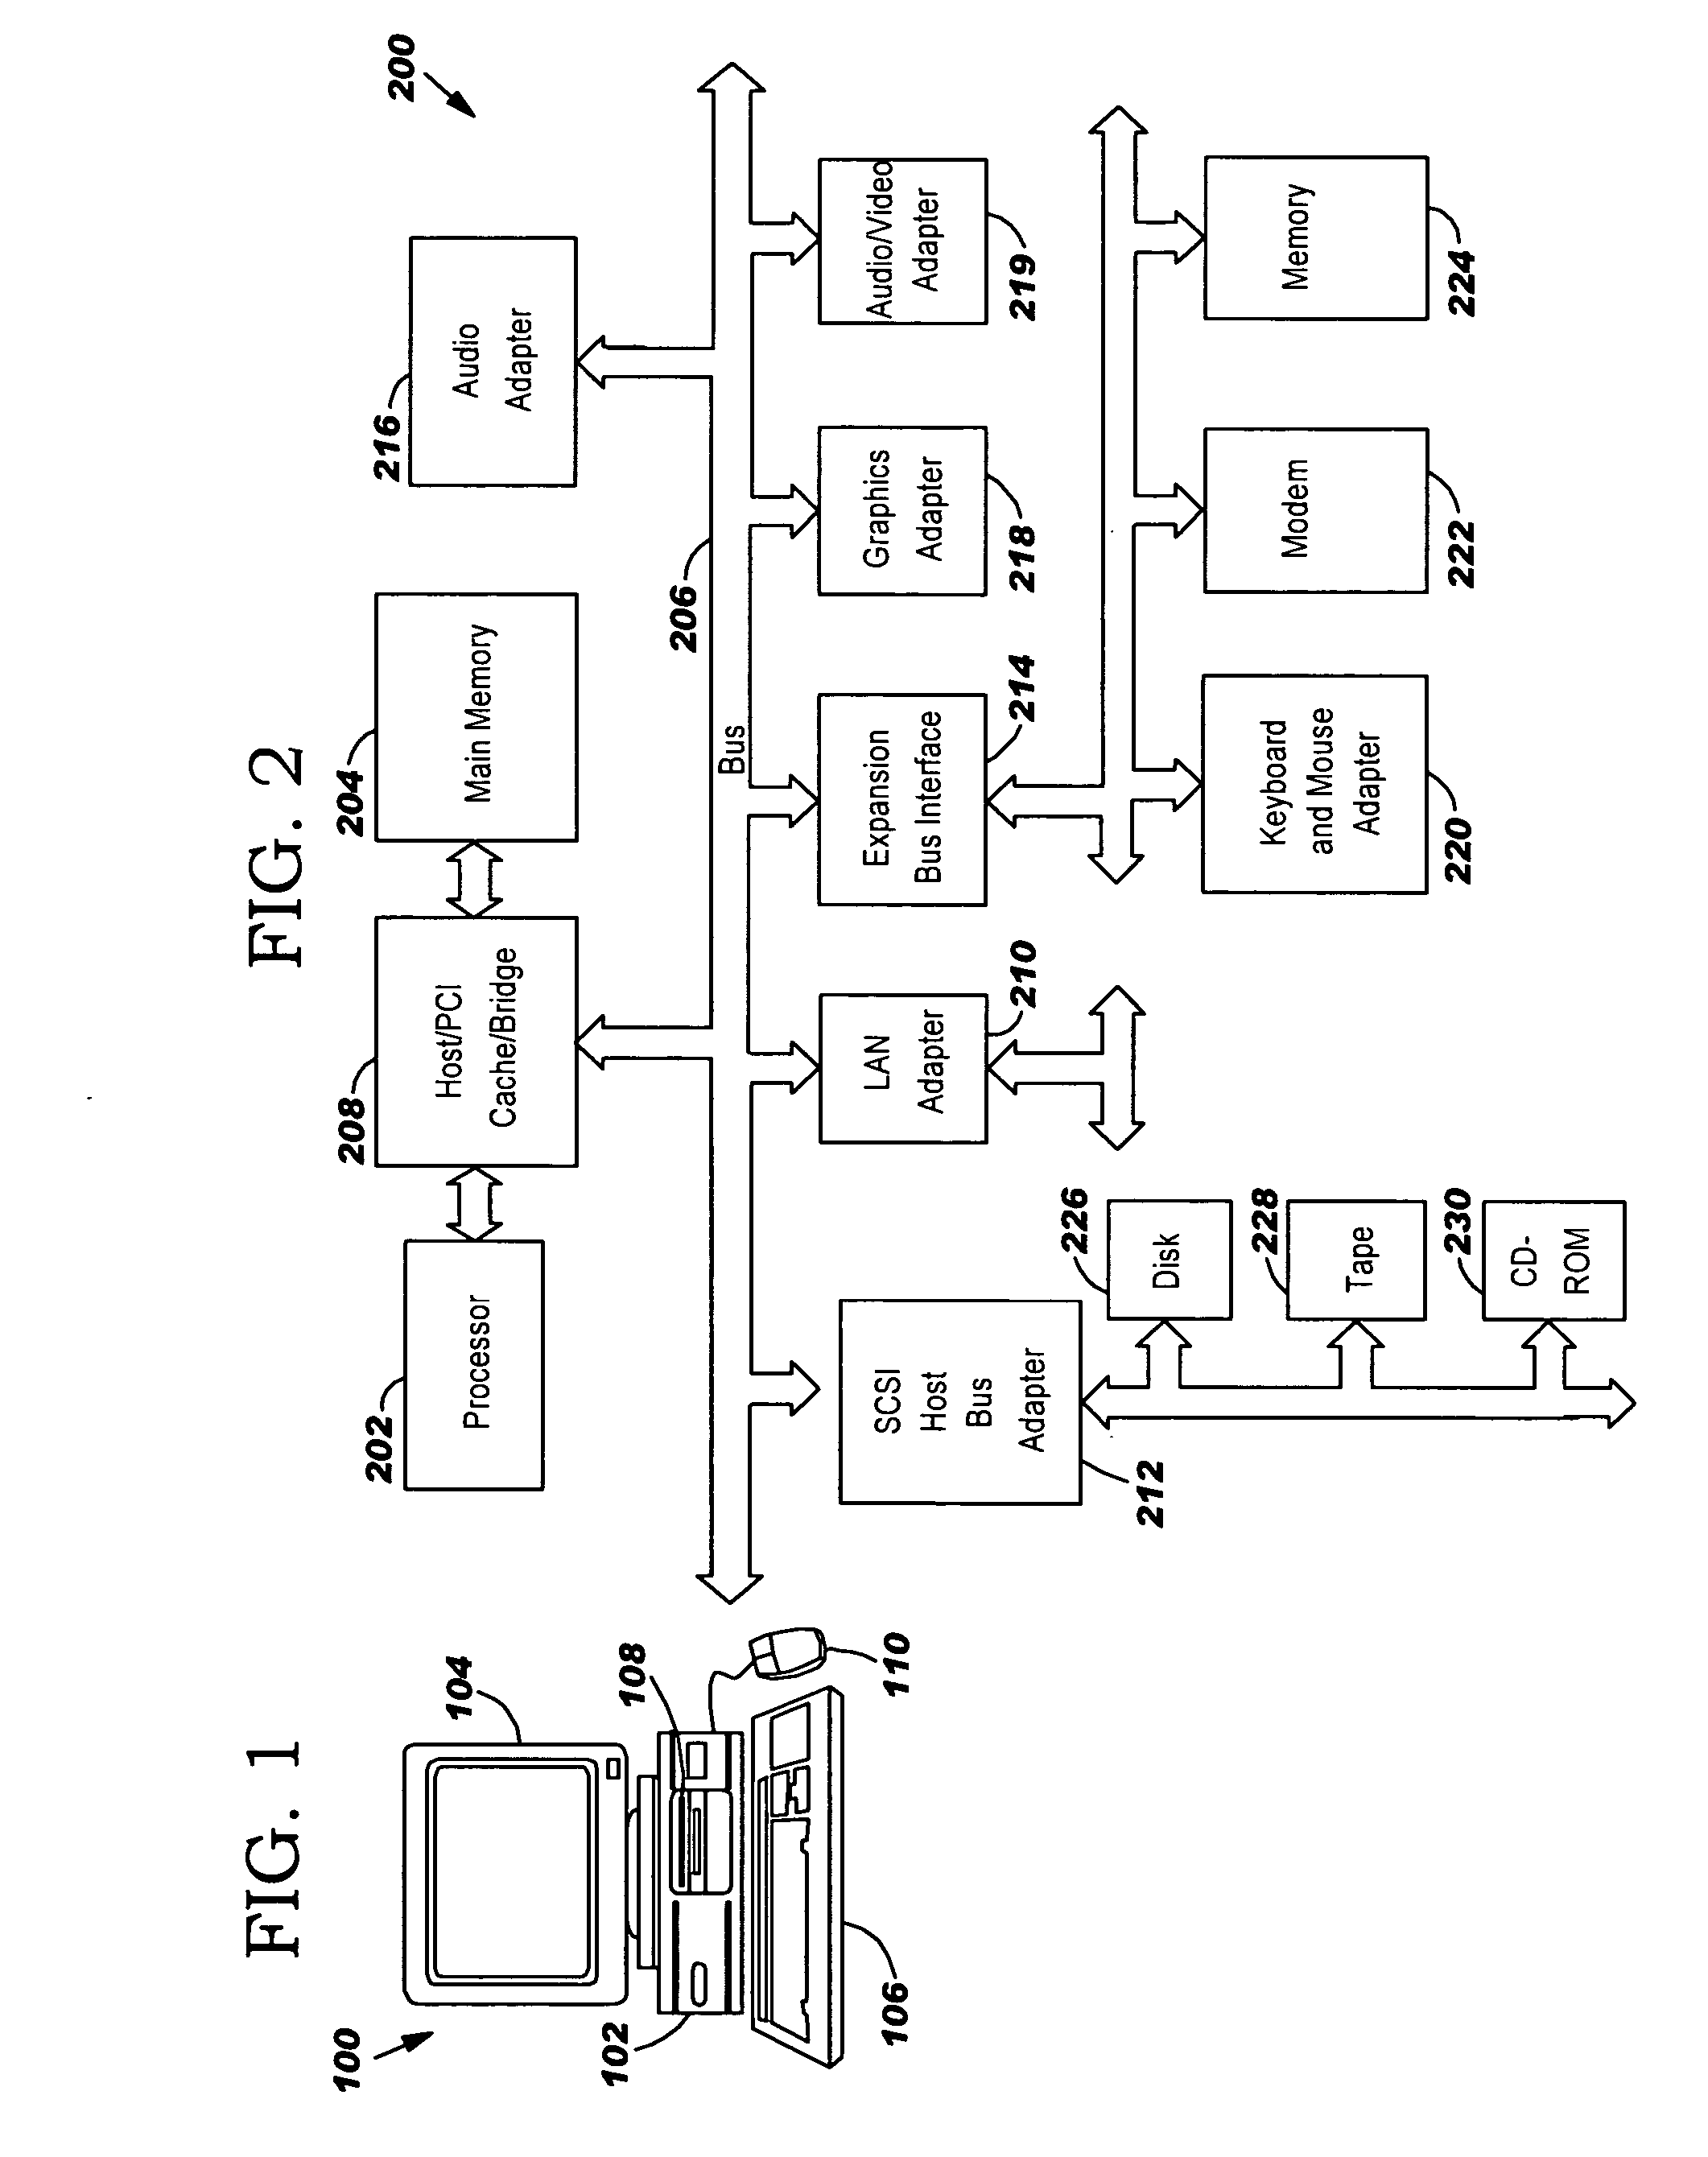 System and method to optimize database access by synchronizing state based on data access patterns